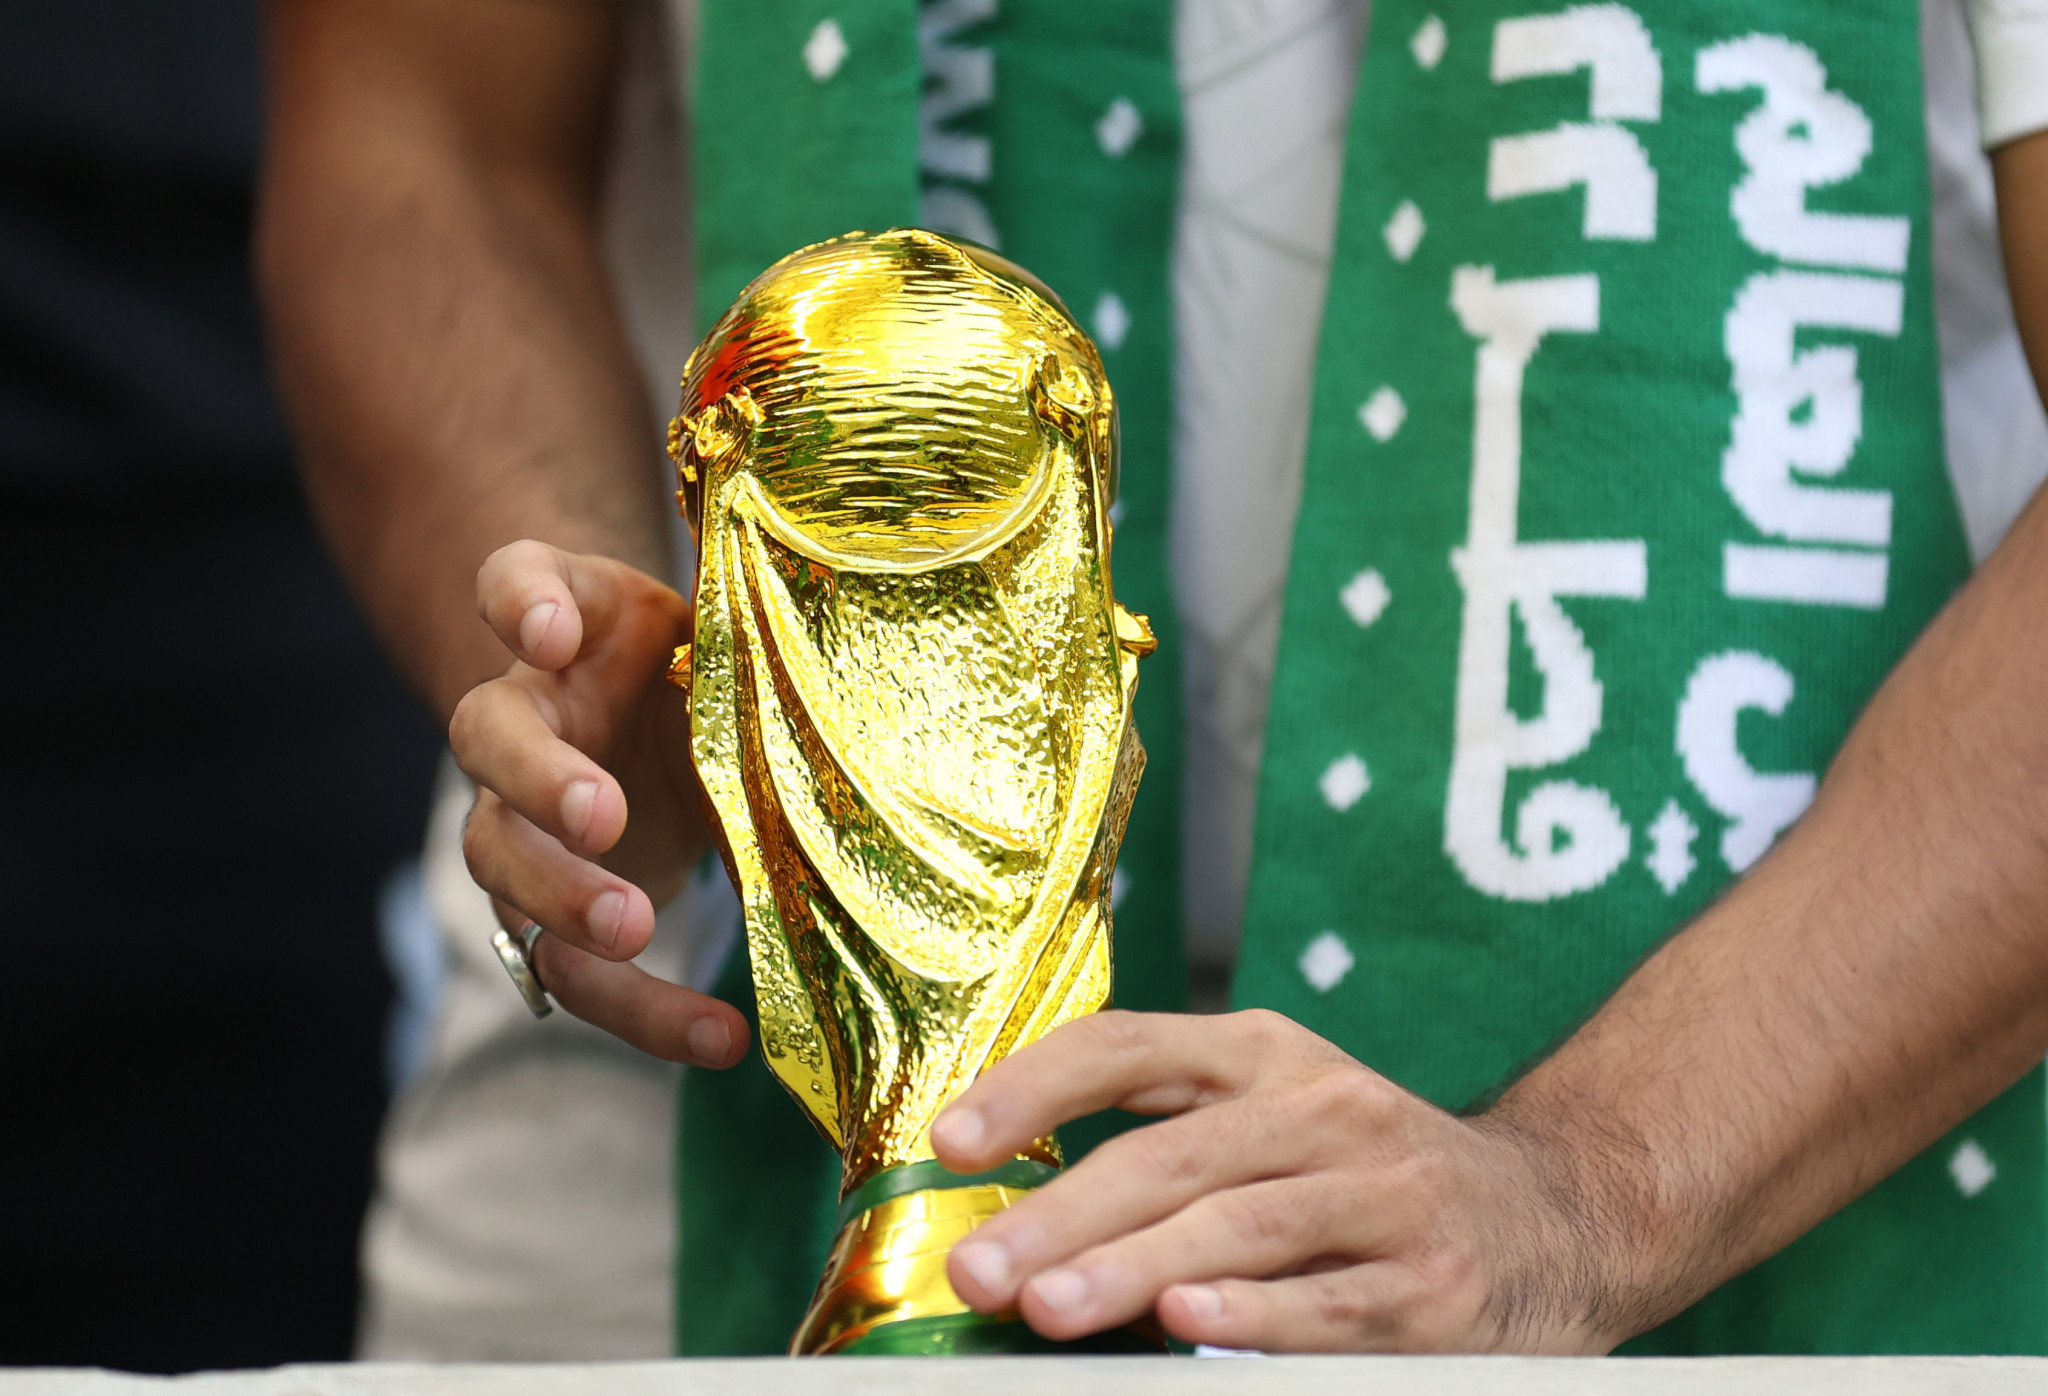 Saudi Tourism Ministry claims no "official bid" for 2030 World Cup